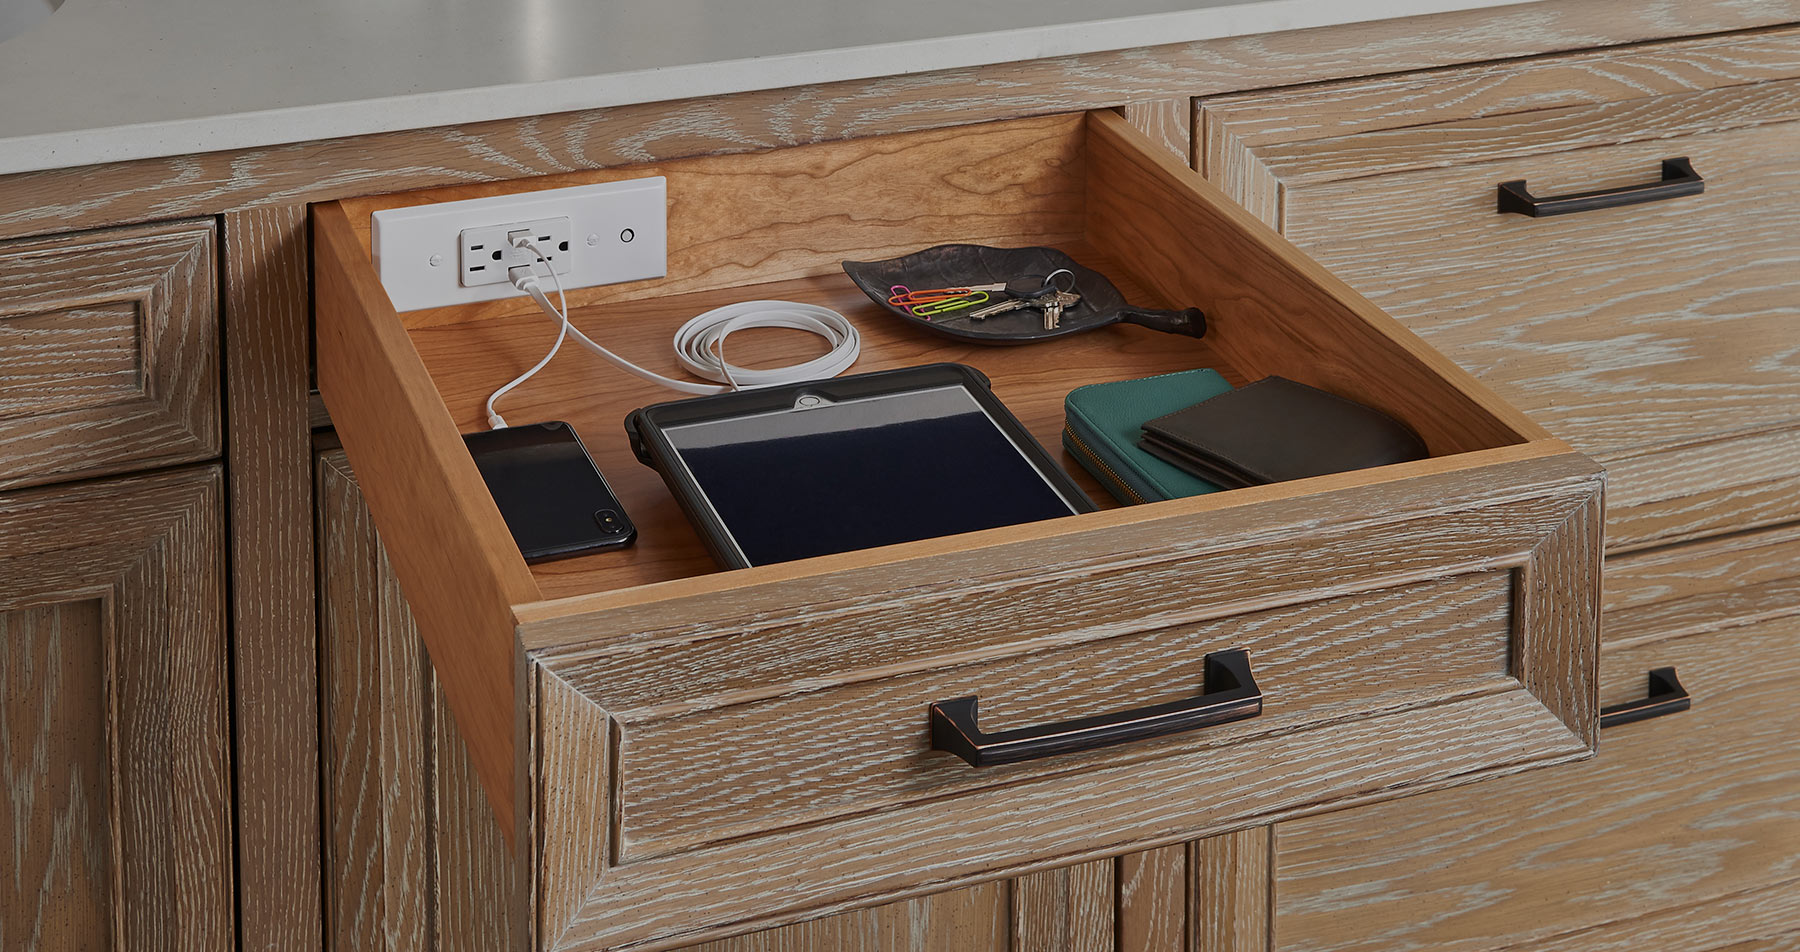 How to Specify and Plan an InDrawer Outlet into your Projects